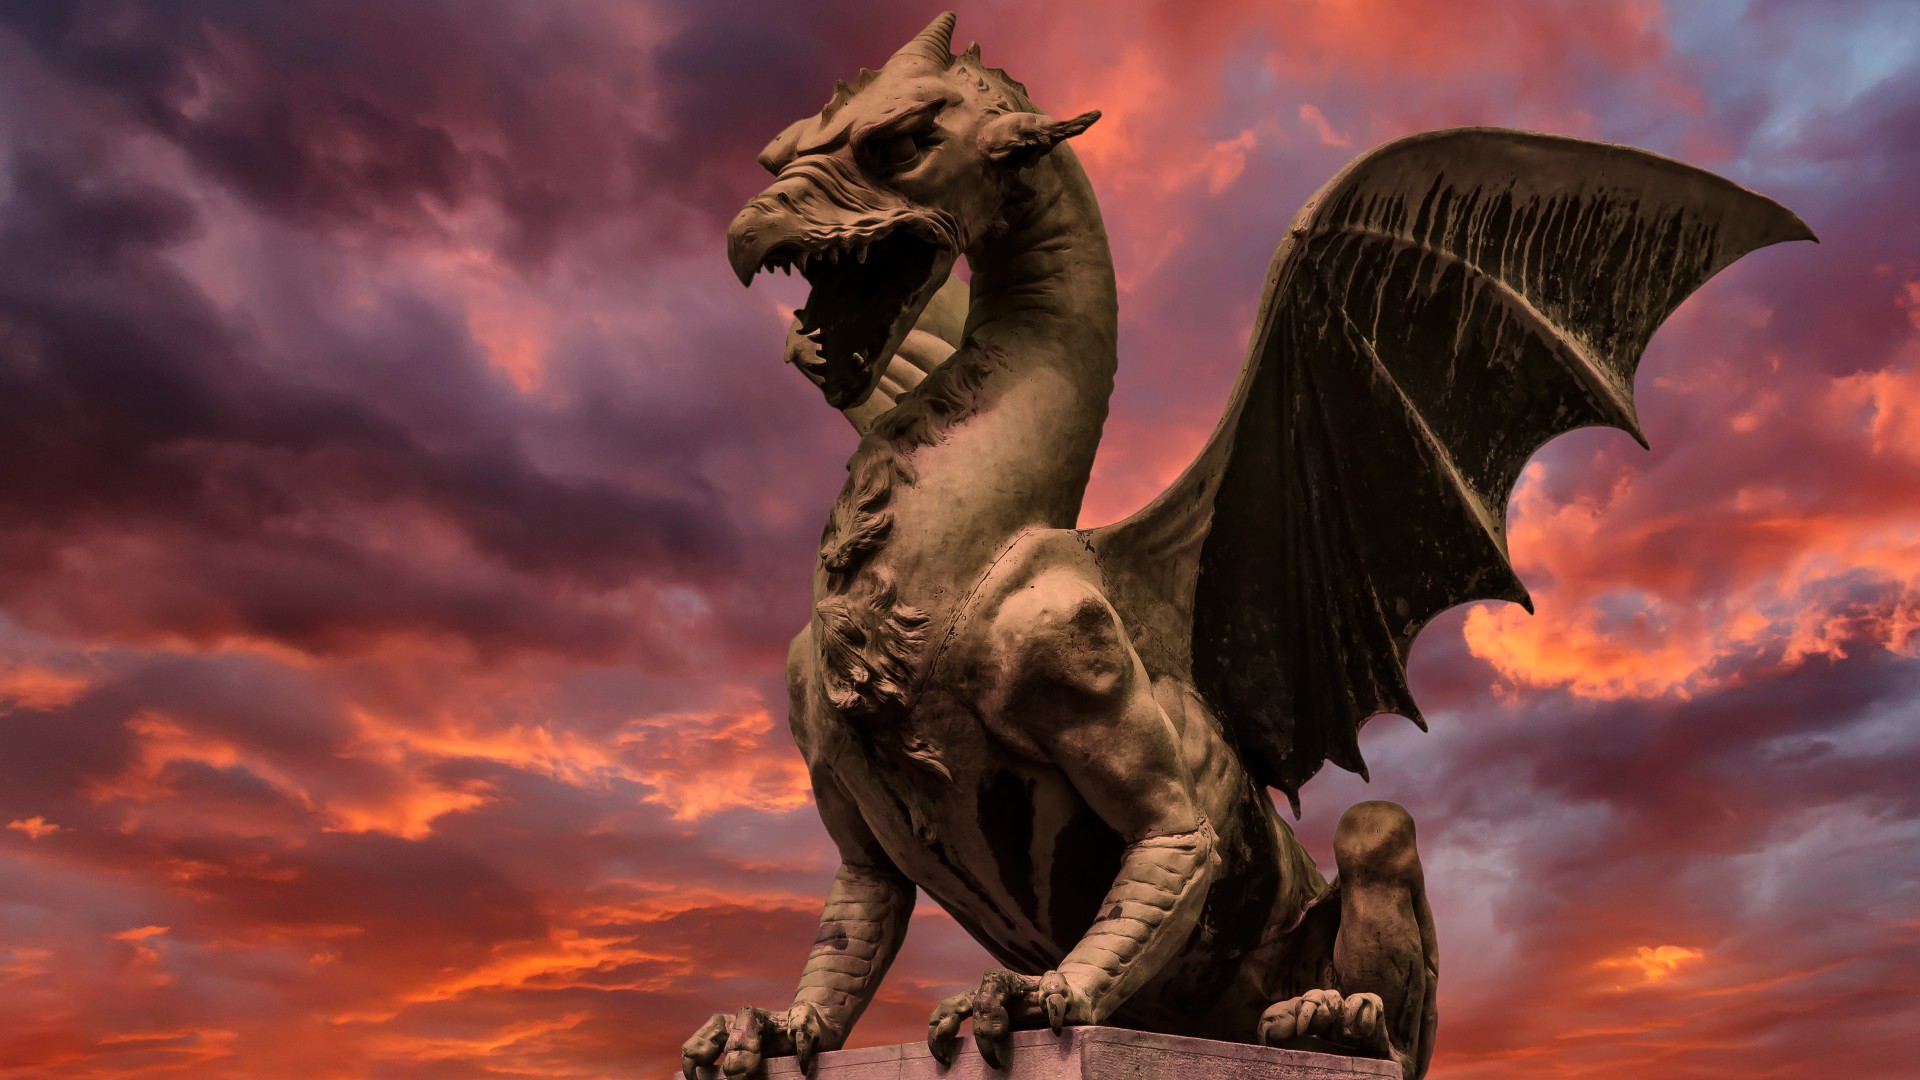 Dragons: A brief history of the mythical beasts | Live Science